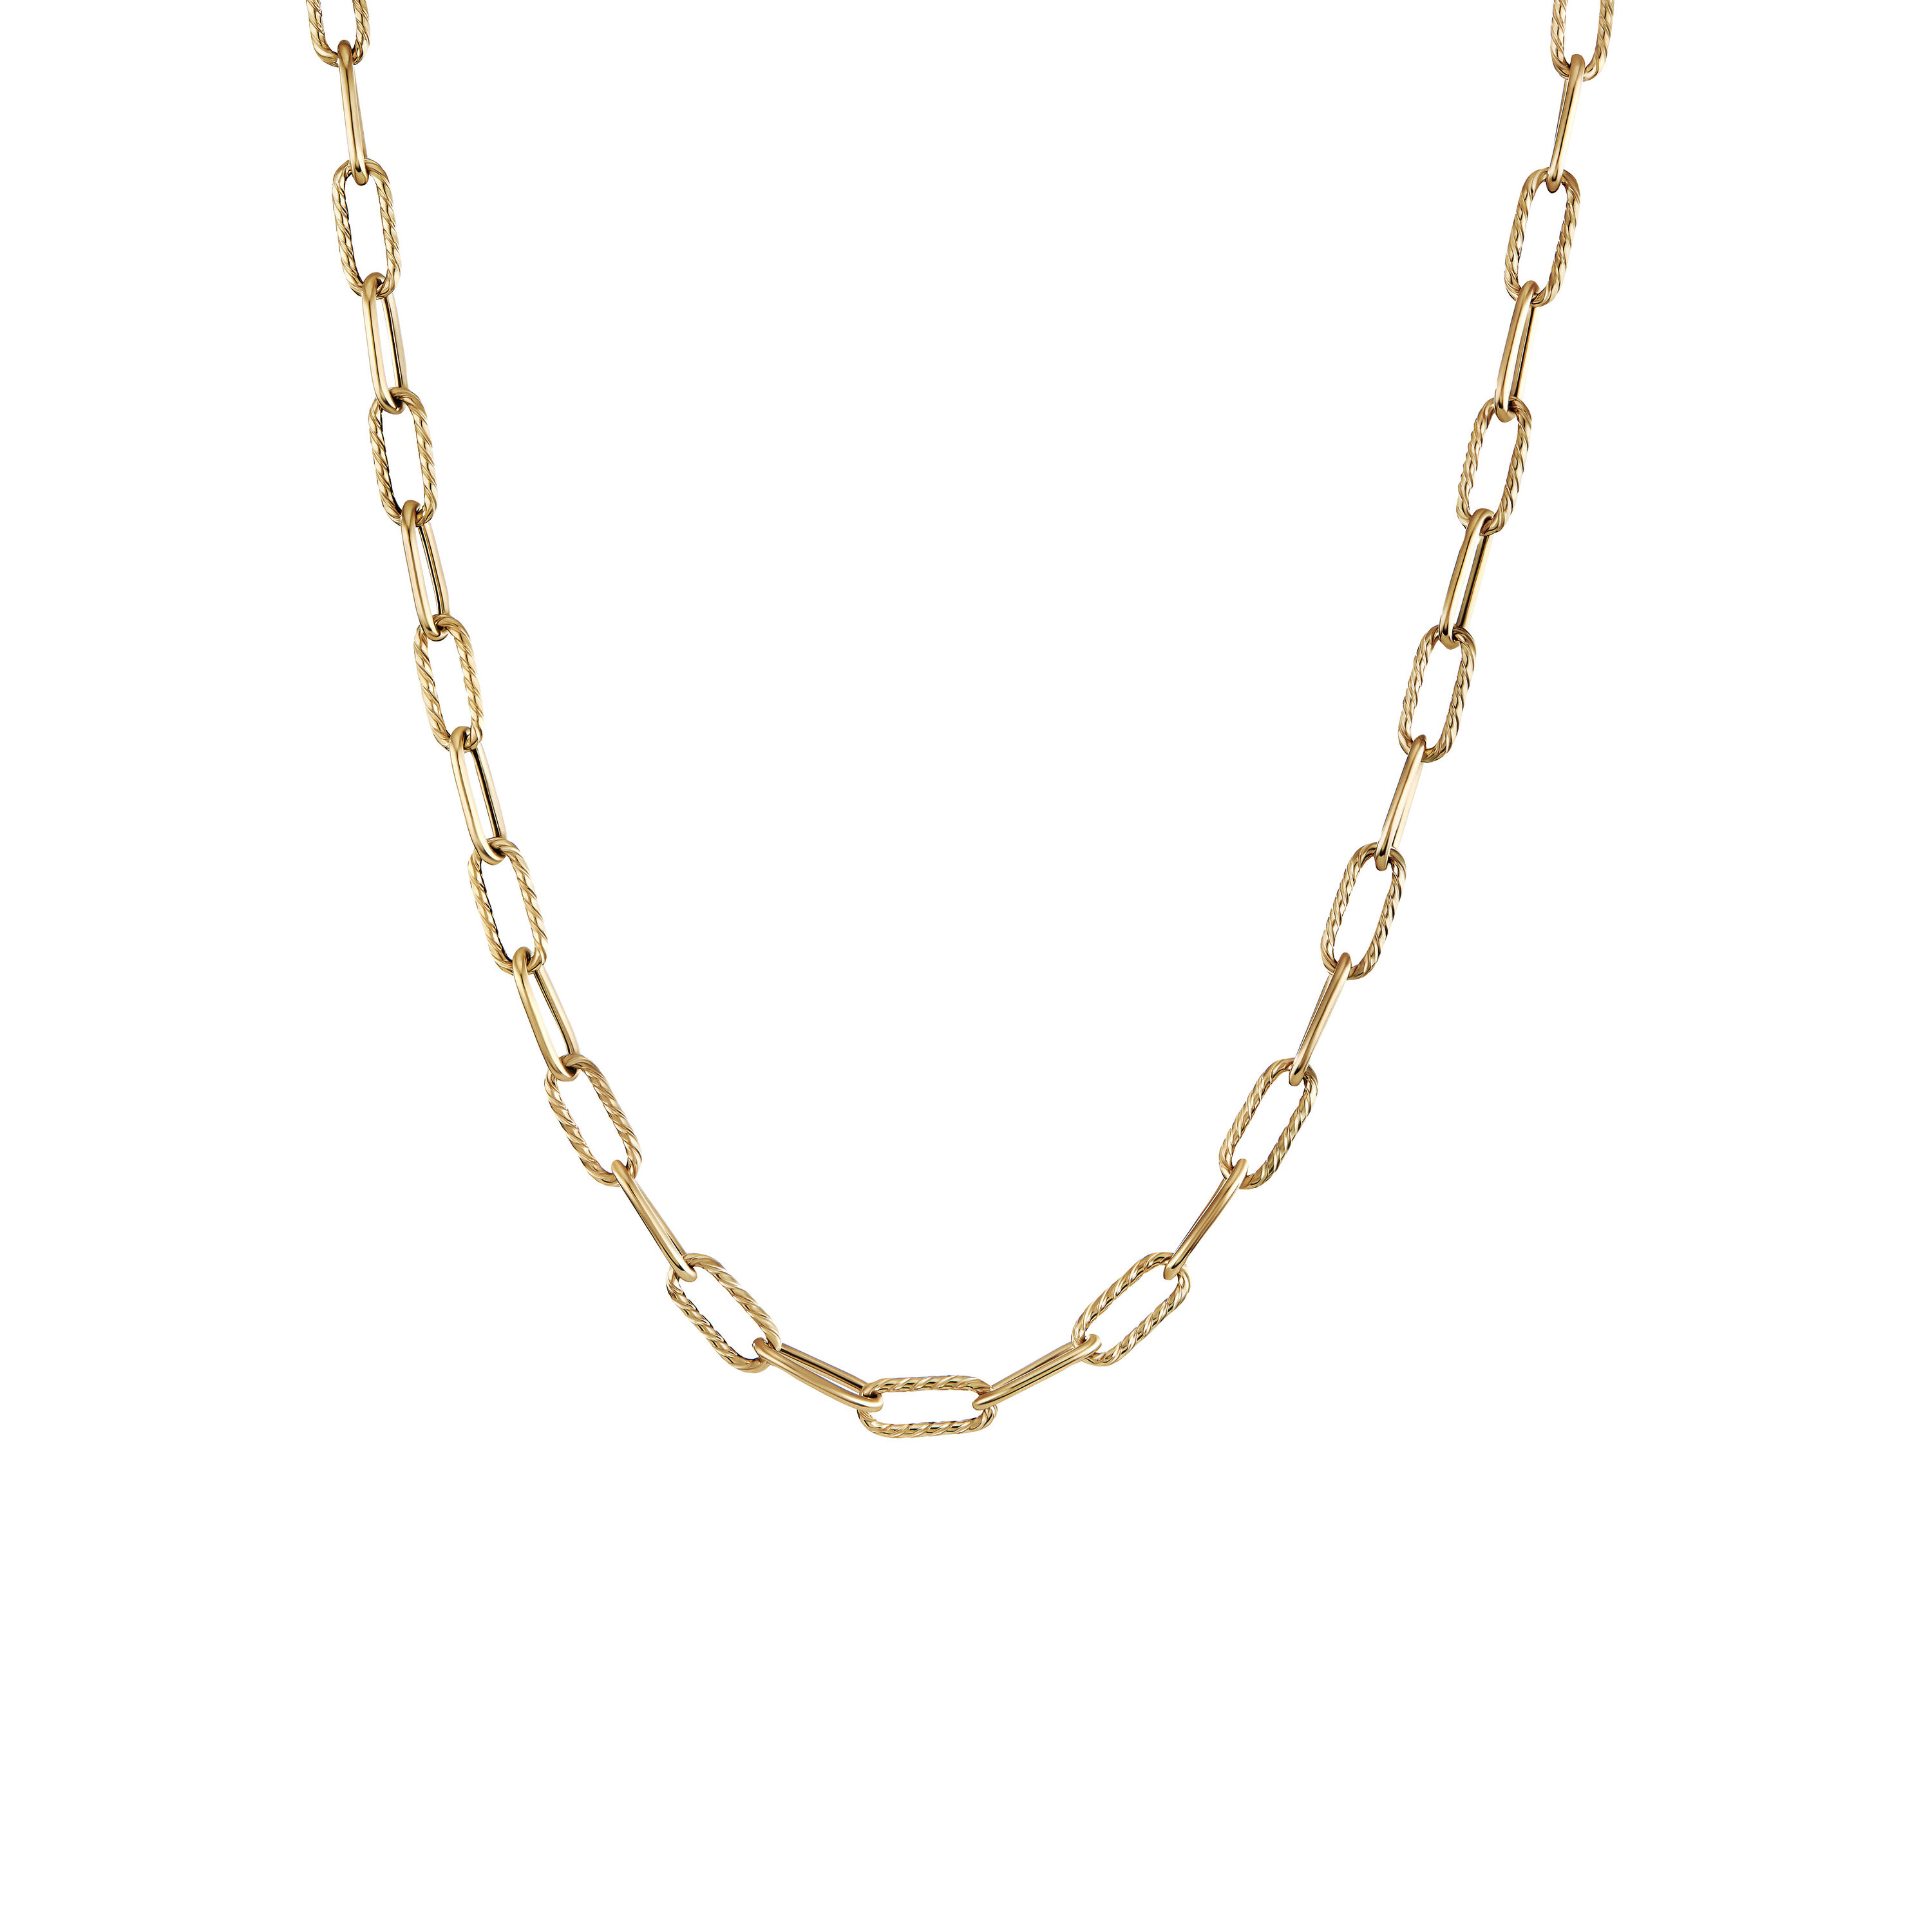 DY Madison® Chain Necklace in 18K Yellow Gold, 4mm